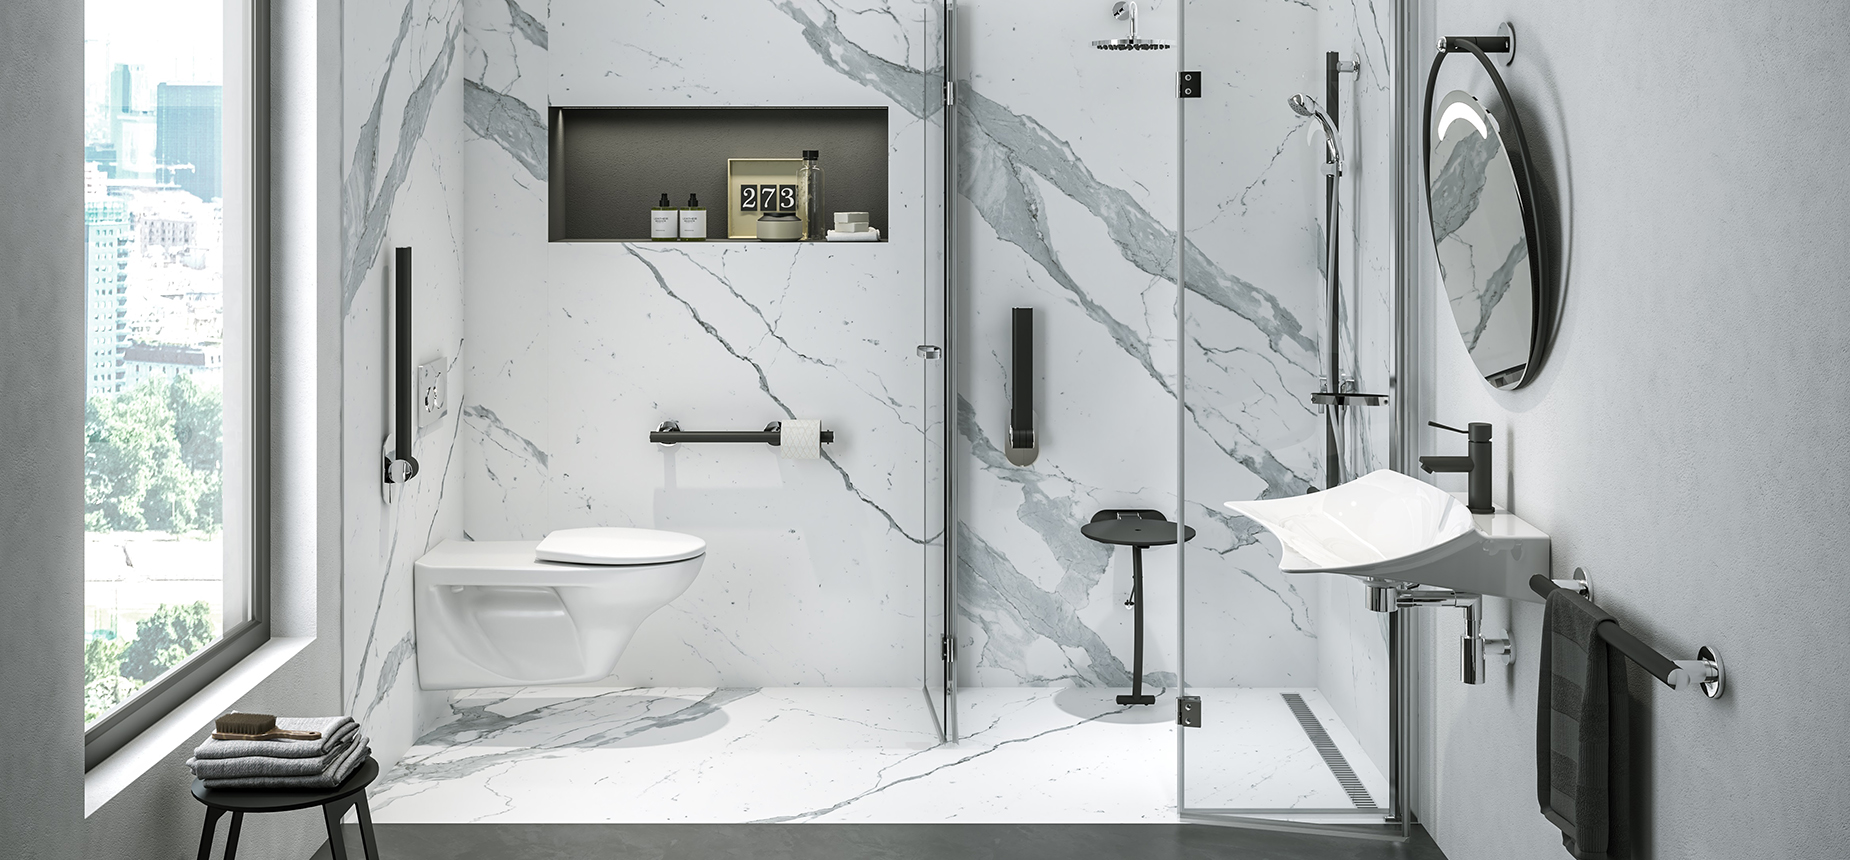 Goman - Il Bagno for You for All